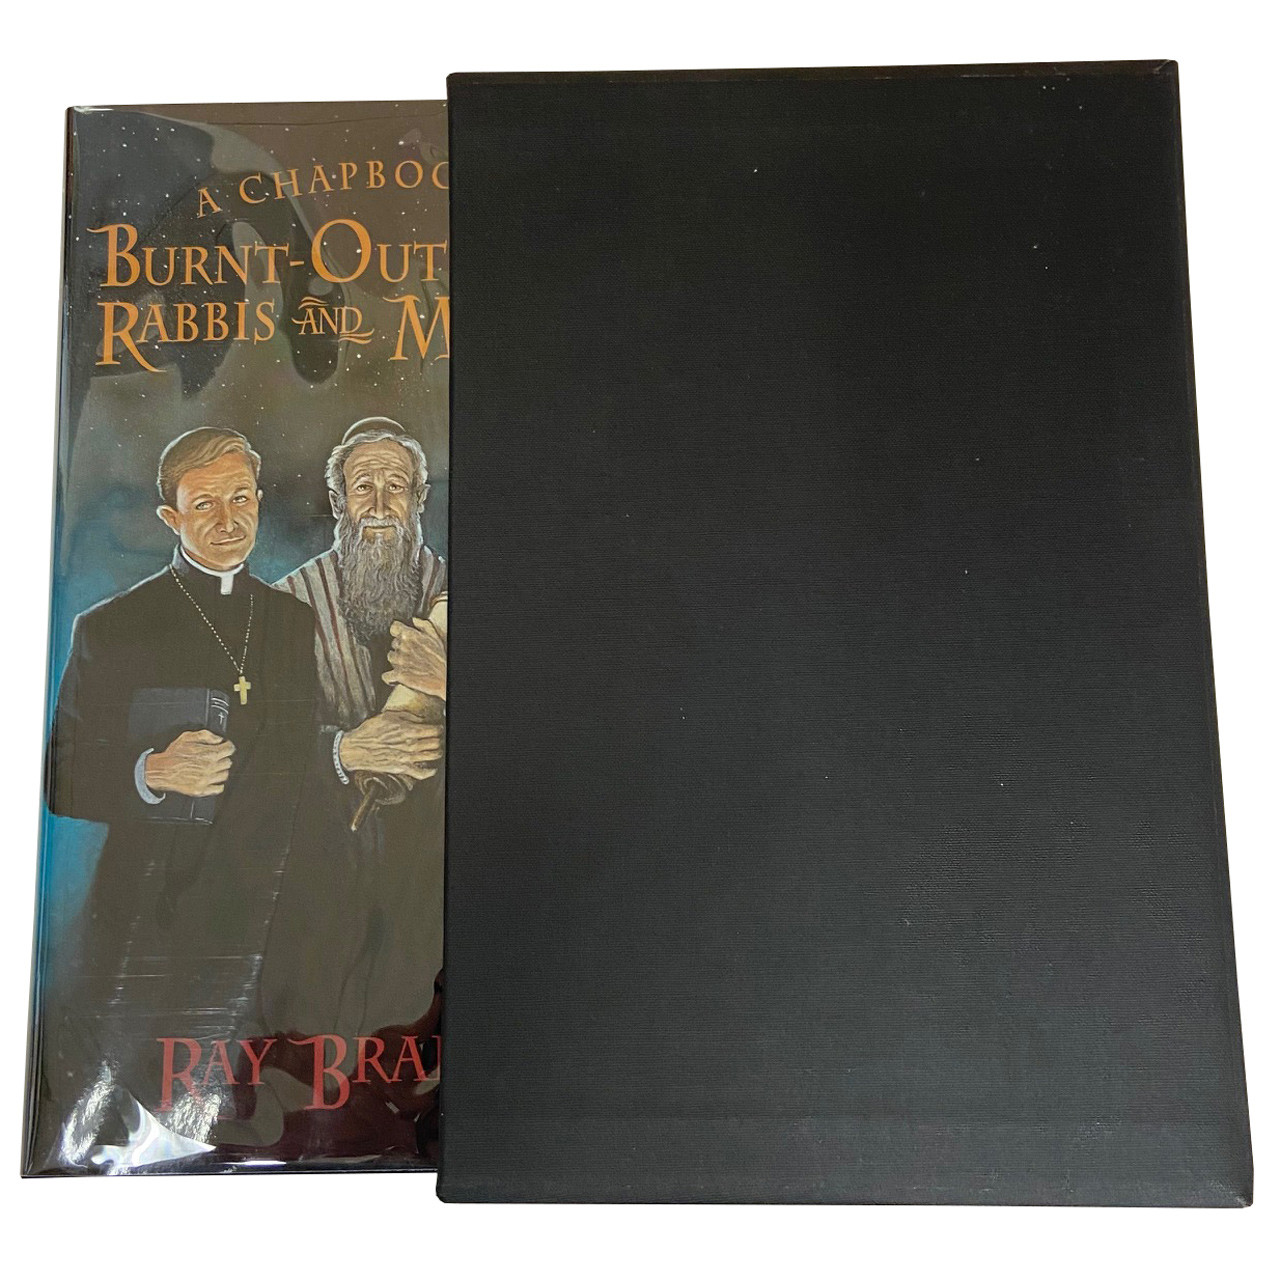 Ray Bradbury "A Chapbook For Burnt-Out Priests, Rabbis, and Ministers" Signed Limited Deluxe Edition No. 226 of 350, Slipcased First Edition [Very Fine]